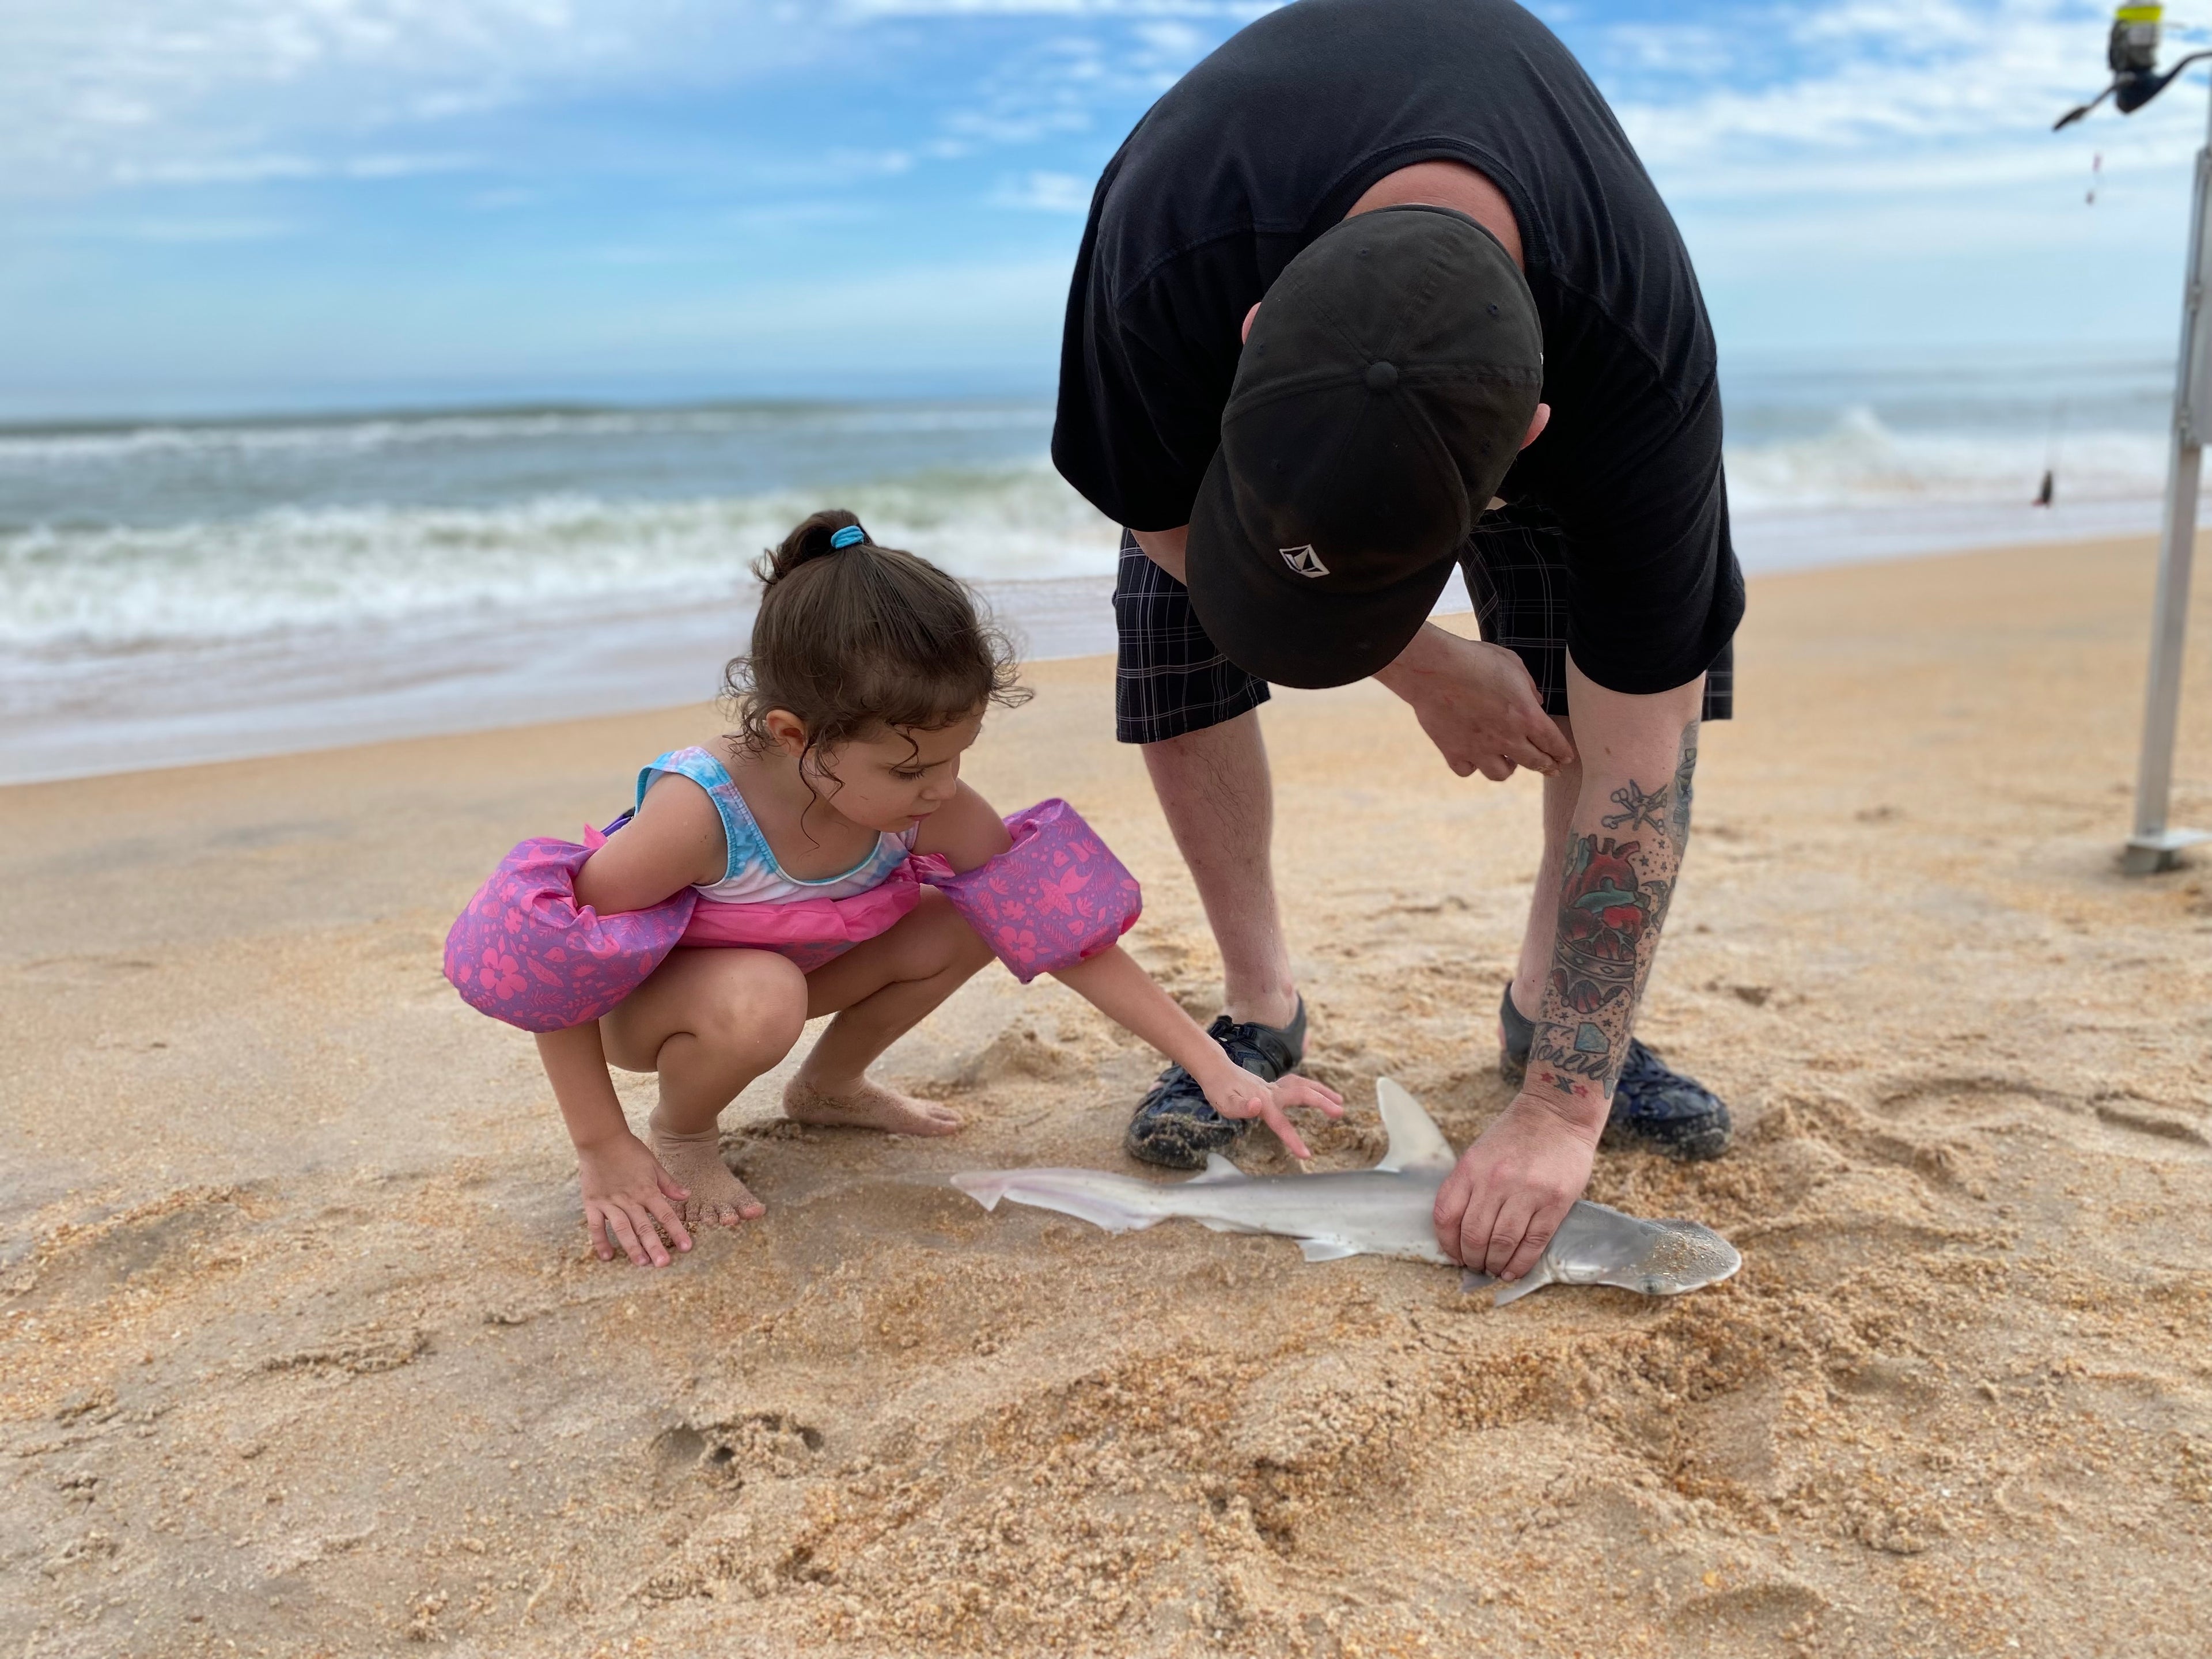 One of our charter clients holding a small shark secure on the sand while his daughter touches a finger on the shark's back